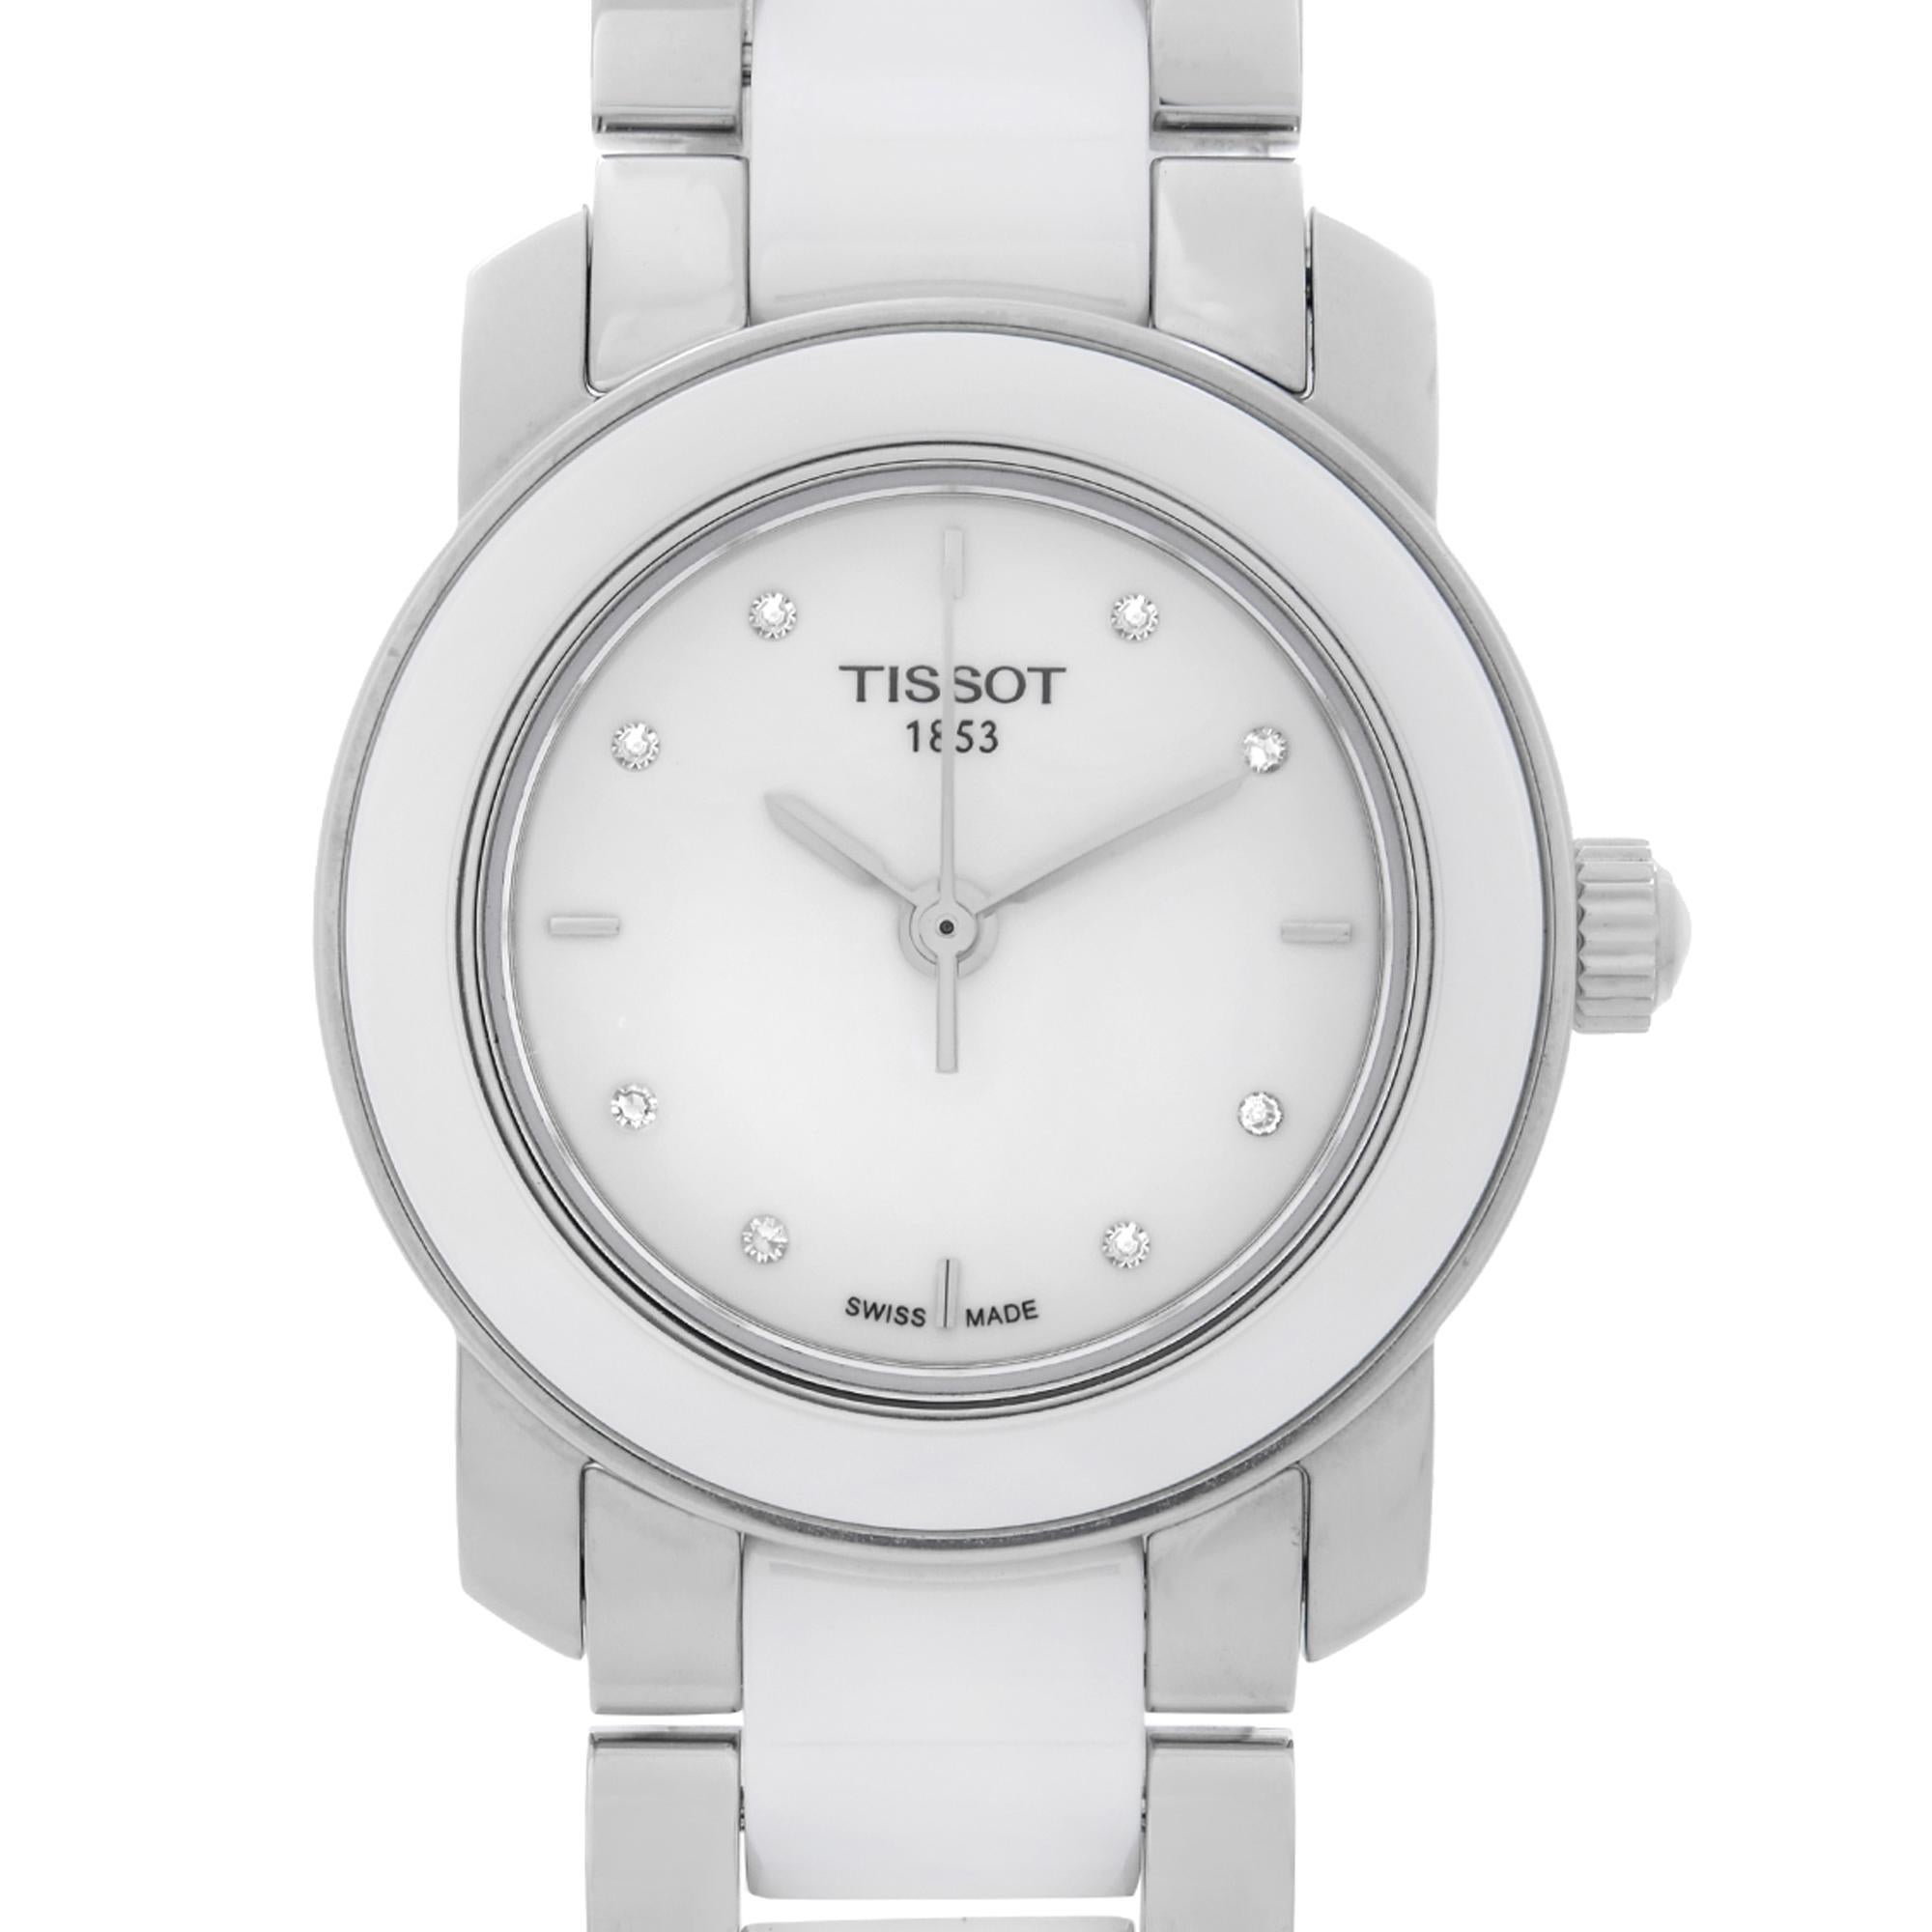 Display Model Tissot T-Trend Cera Steel Ceramic White Diamond Dial Ladies Watch T064.210.22.016.00. This Beautiful Timepiece is Powered by Quartz (Battery) Movement and Features: Rounds Stainless Steel Case with Stainless Steel and White Ceramic